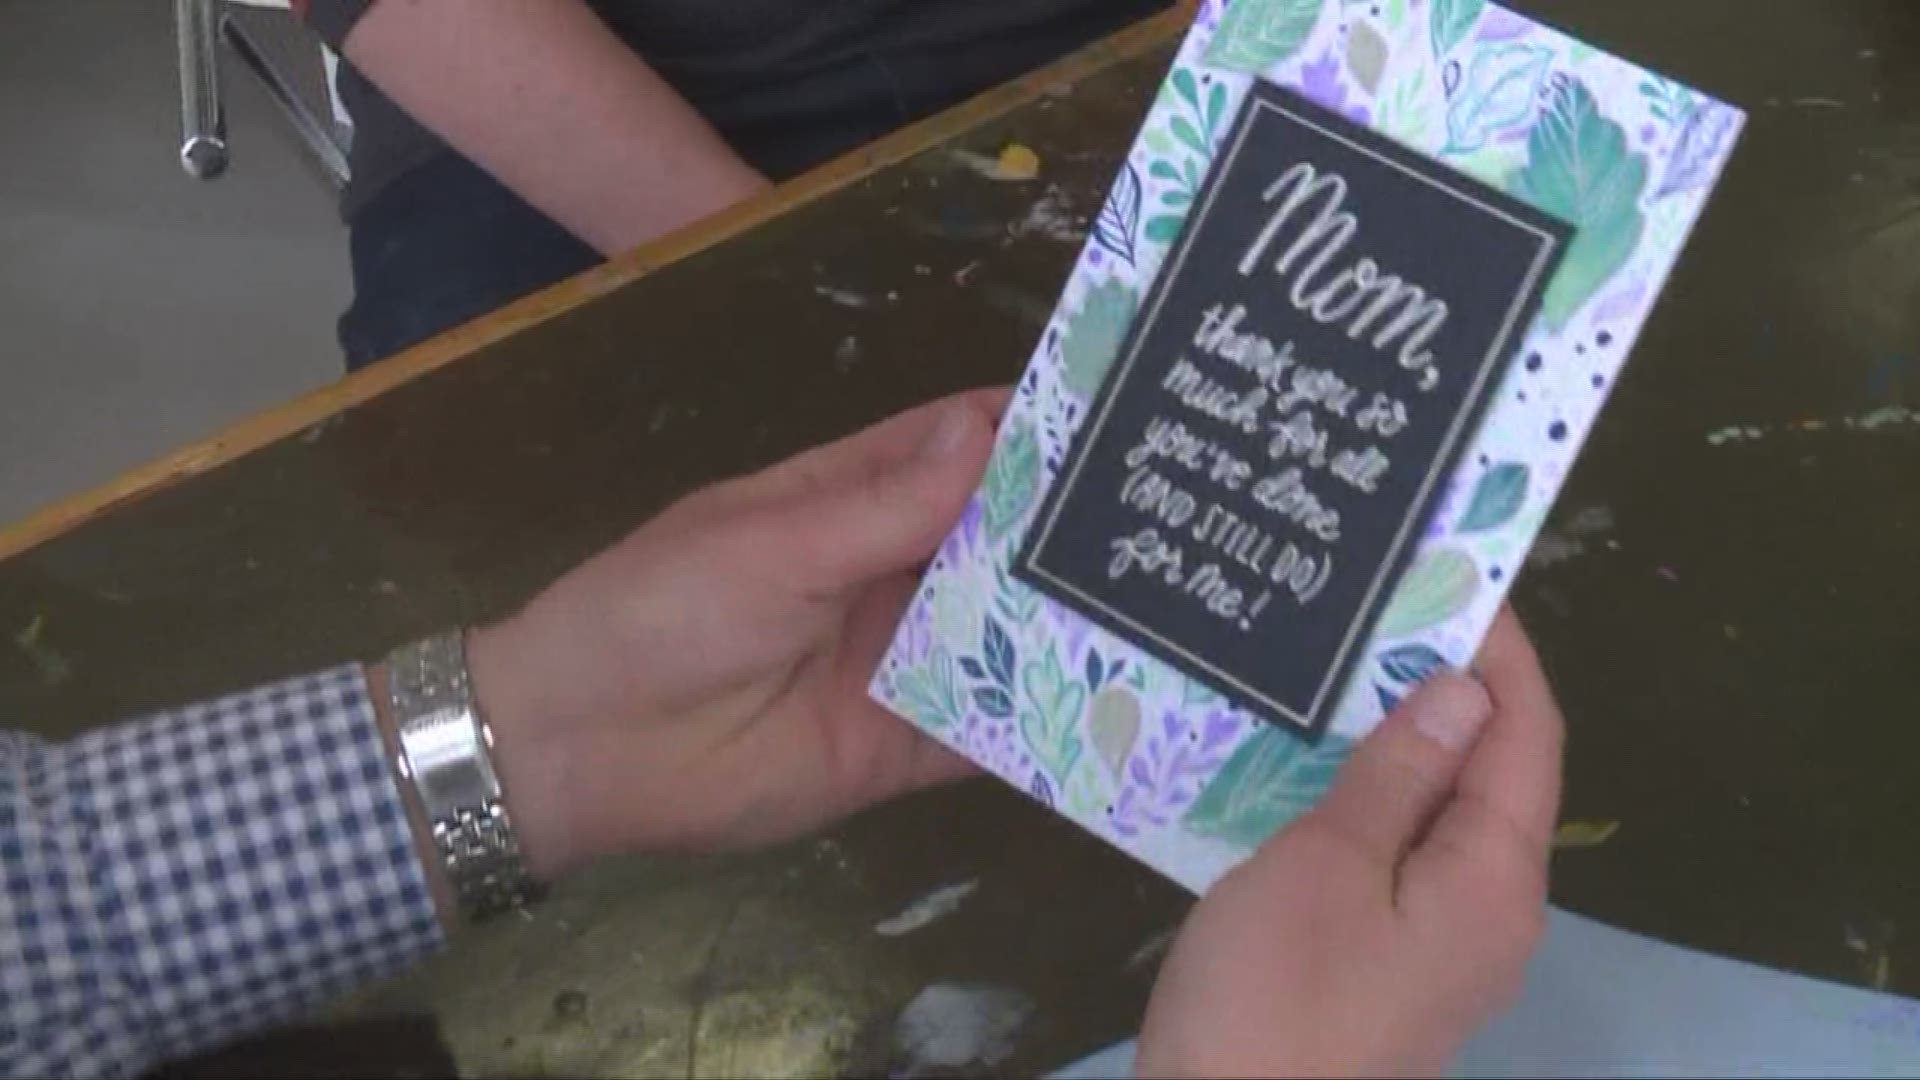 May 11, 2018: It's time to celebrate our moms, and WKYC's Austin Love visited American Greetings to help craft a special card for his mother.